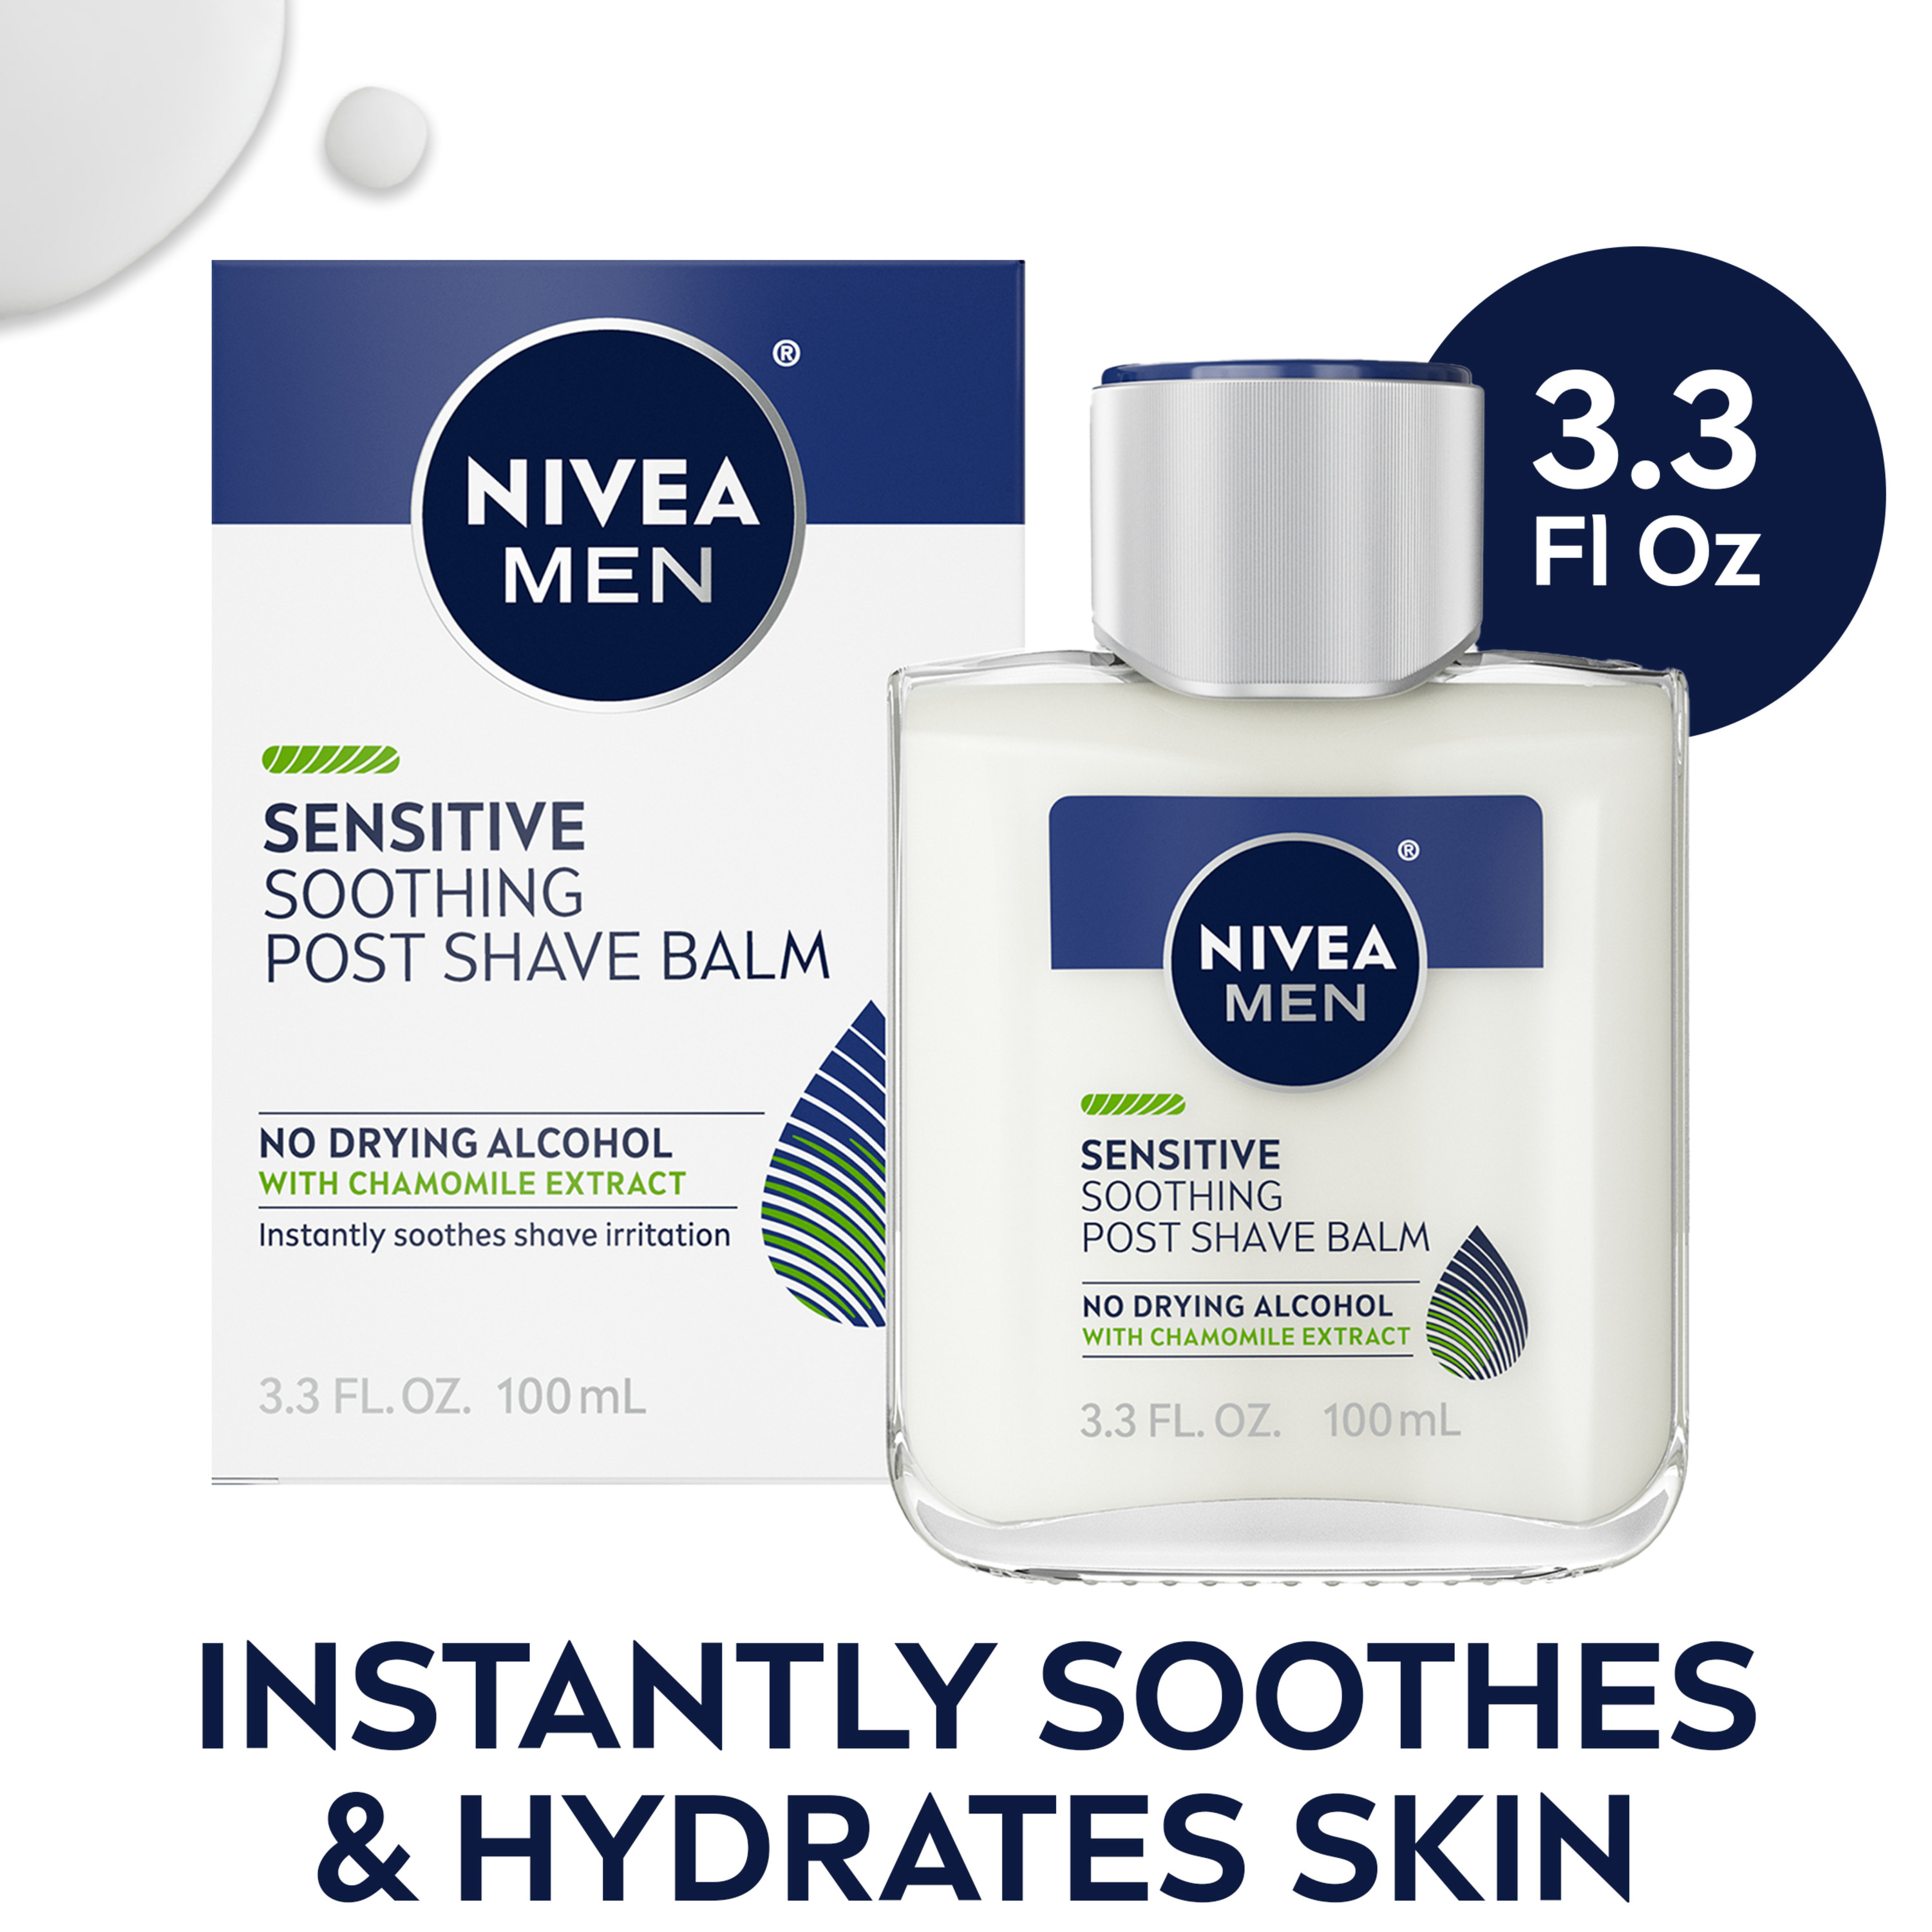 NIVEA MEN Sensitive Post Shave Balm with Vitamin E, Chamomile and Witch Hazel Extracts, 3.3 Fl Oz Bottle - image 1 of 15